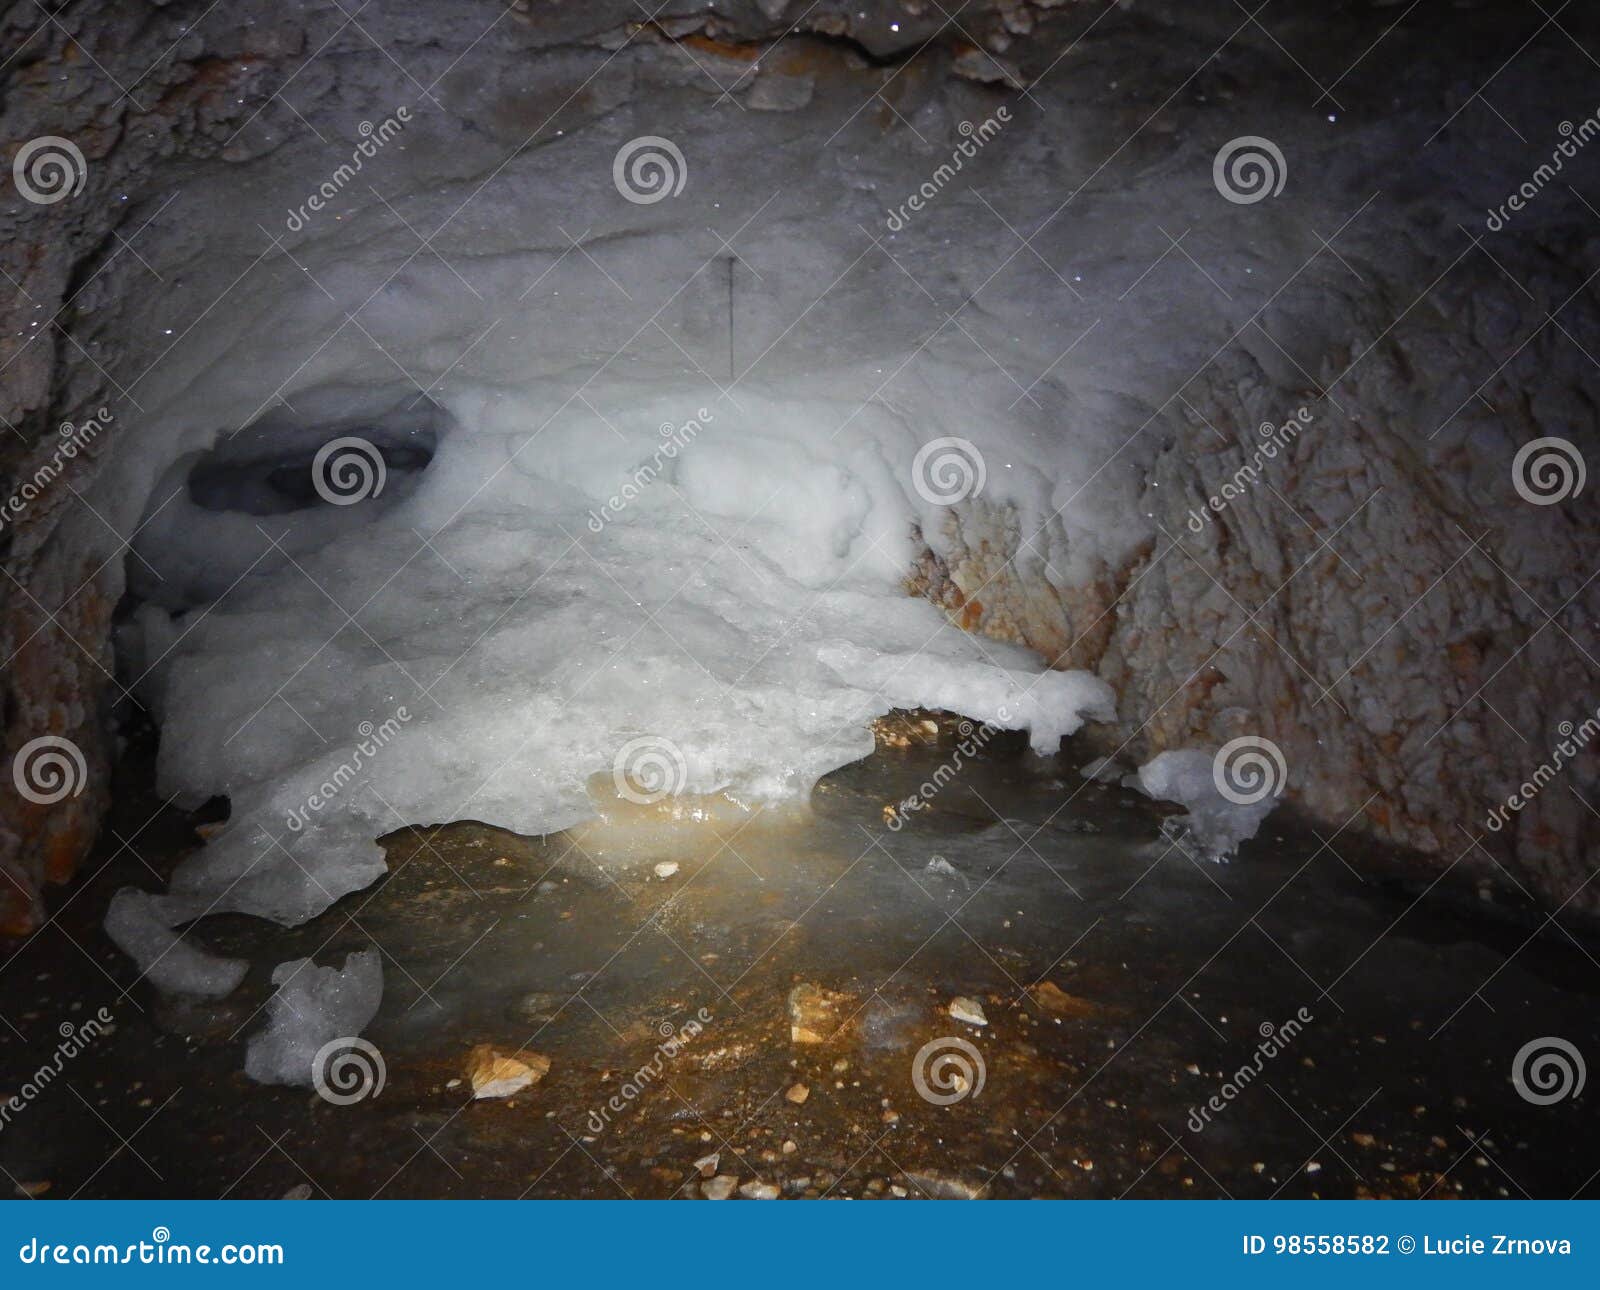 first world war tunel with ice at tofana di dentro in dolomites